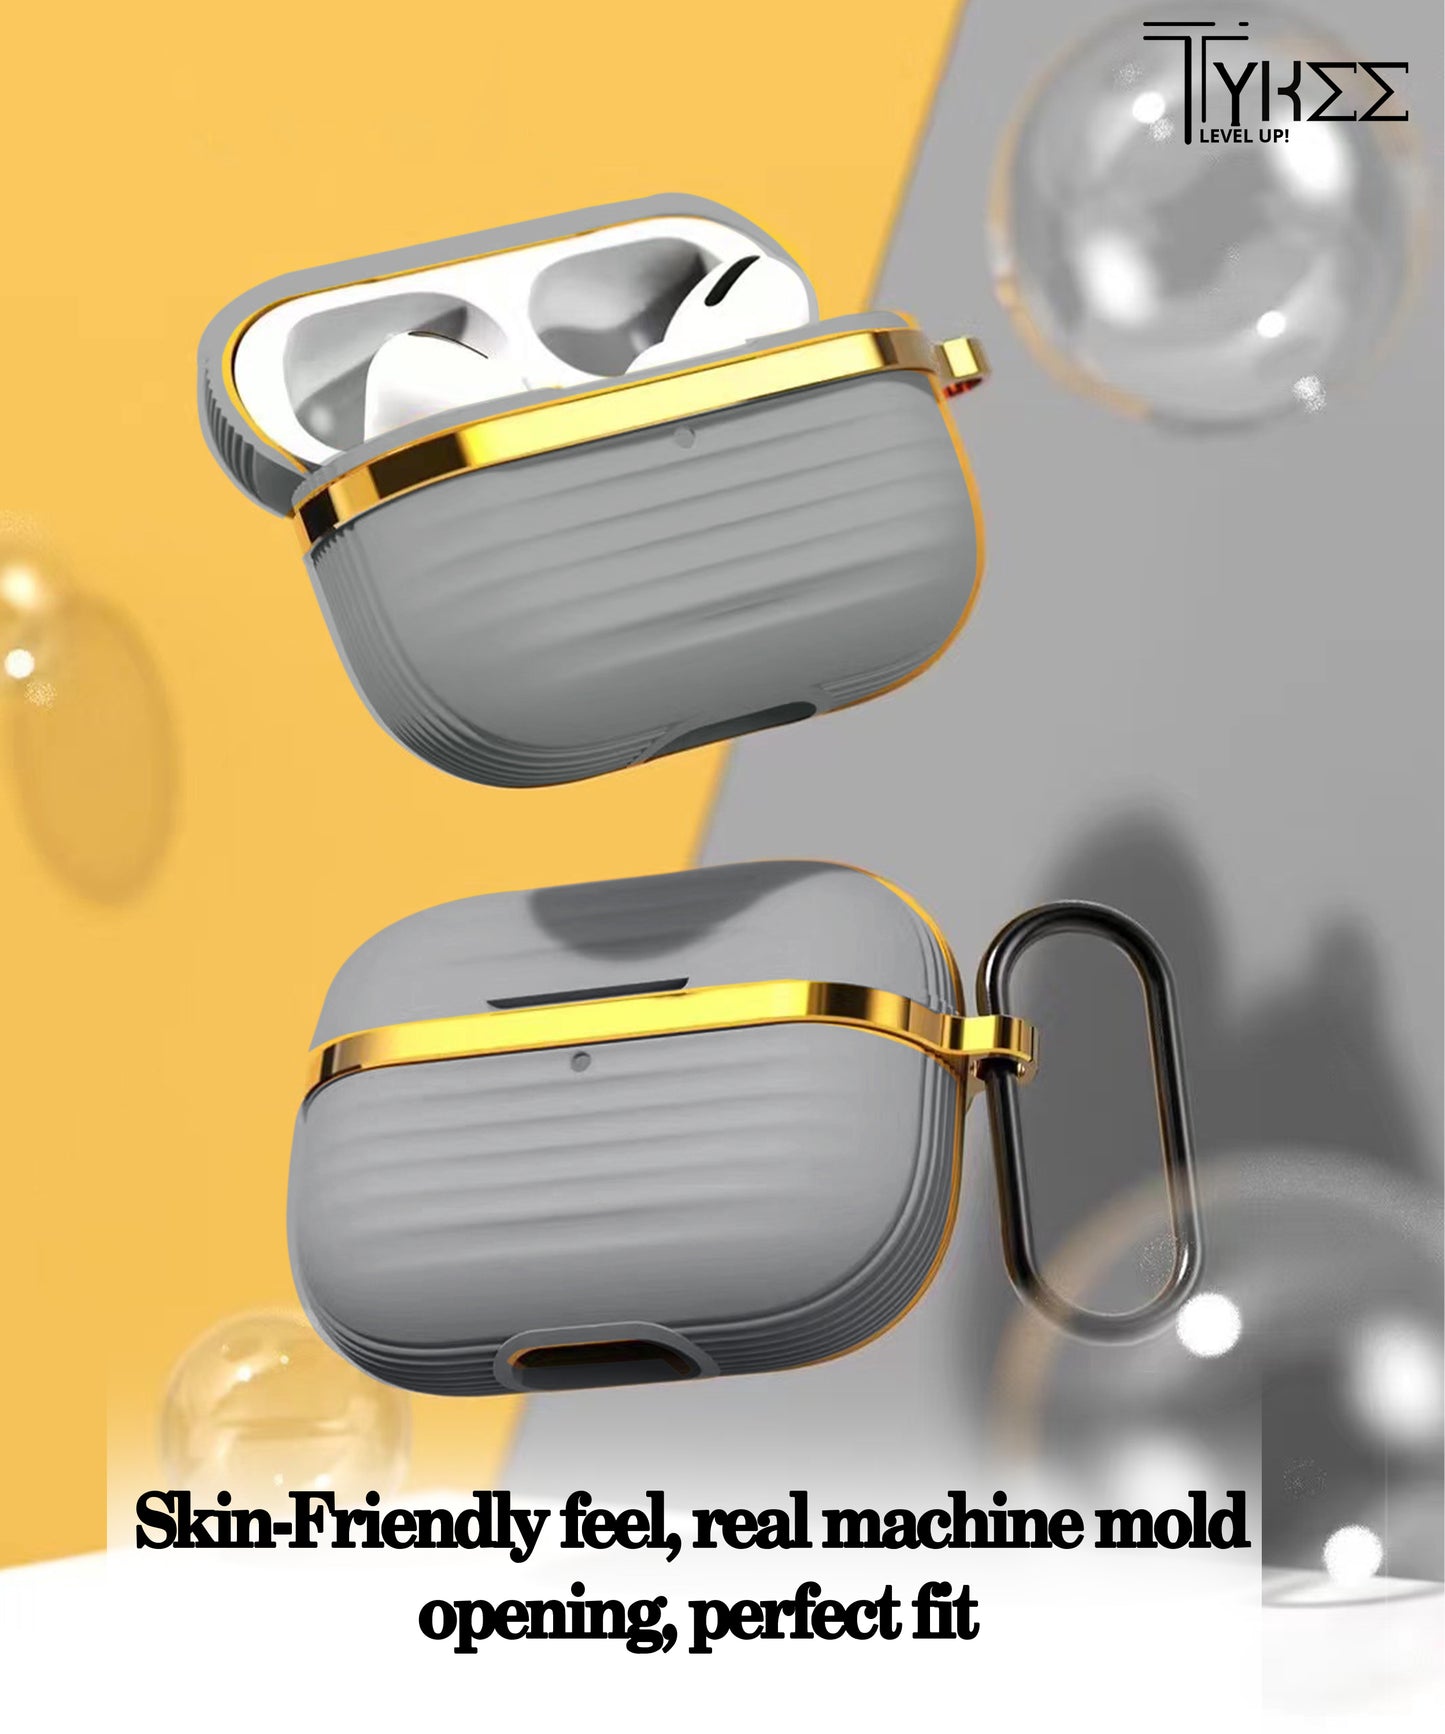 Silicon AirPod Case with Gold Insert